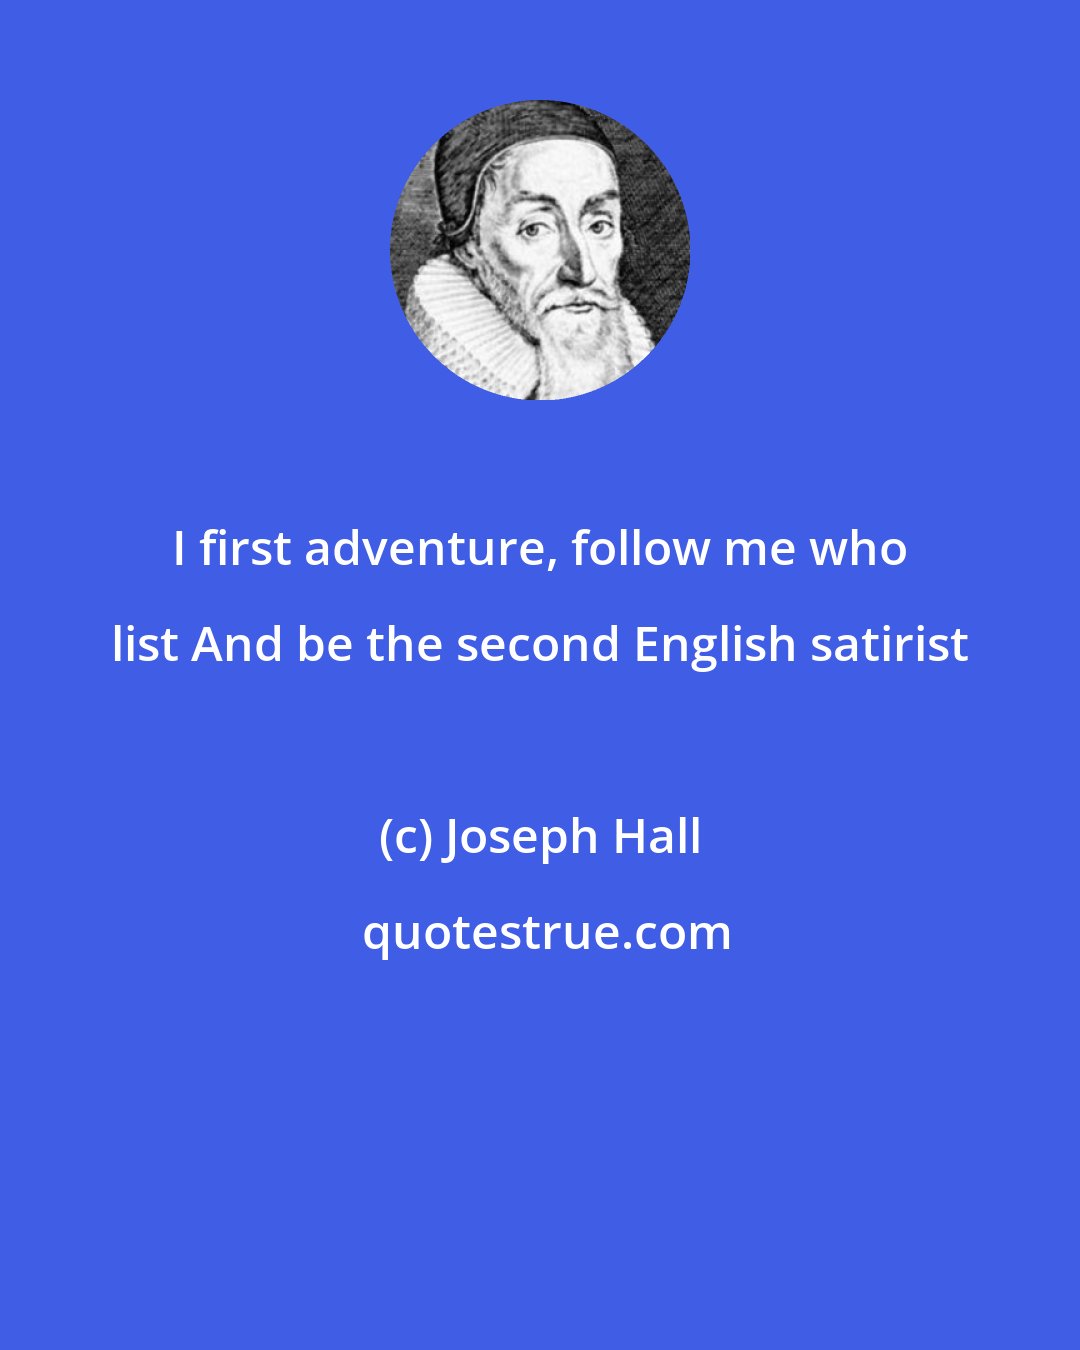 Joseph Hall: I first adventure, follow me who list And be the second English satirist